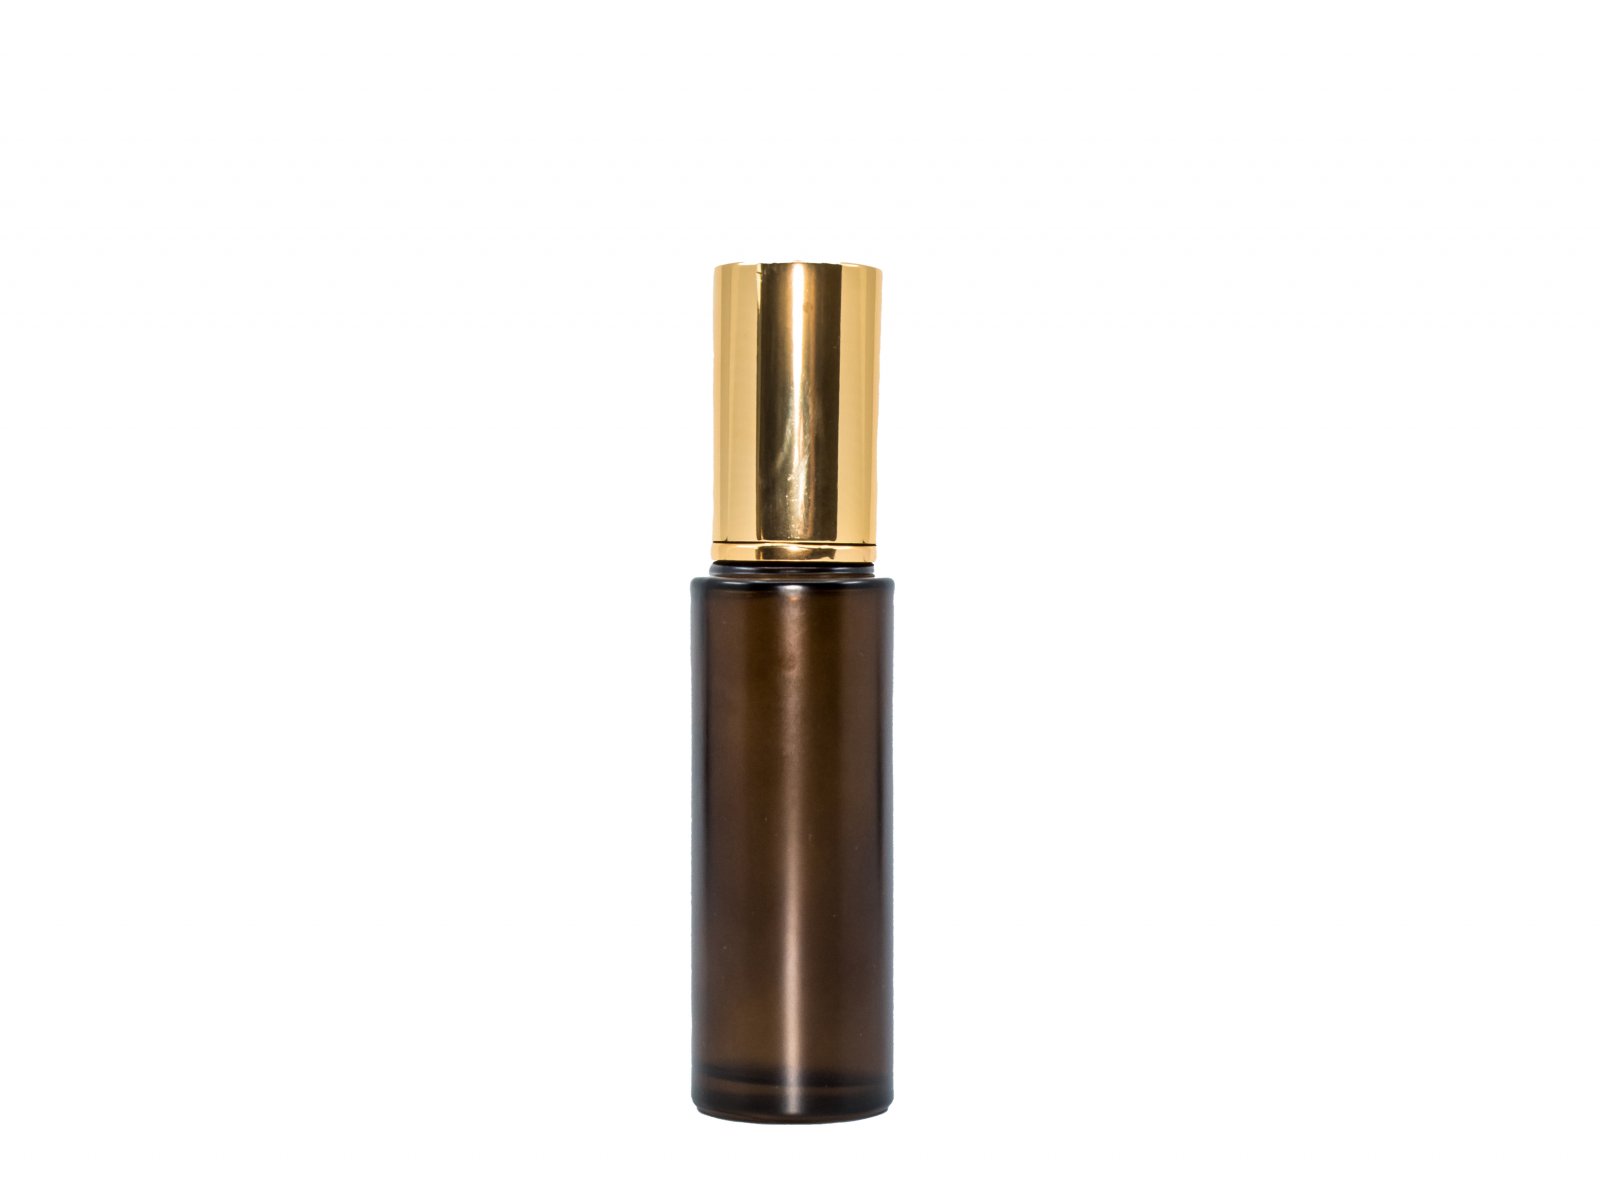 BEWIT GLASS BOTTLE BROWN FROSTED SPRAY, GOLD CAP, 50 ML -  - 3